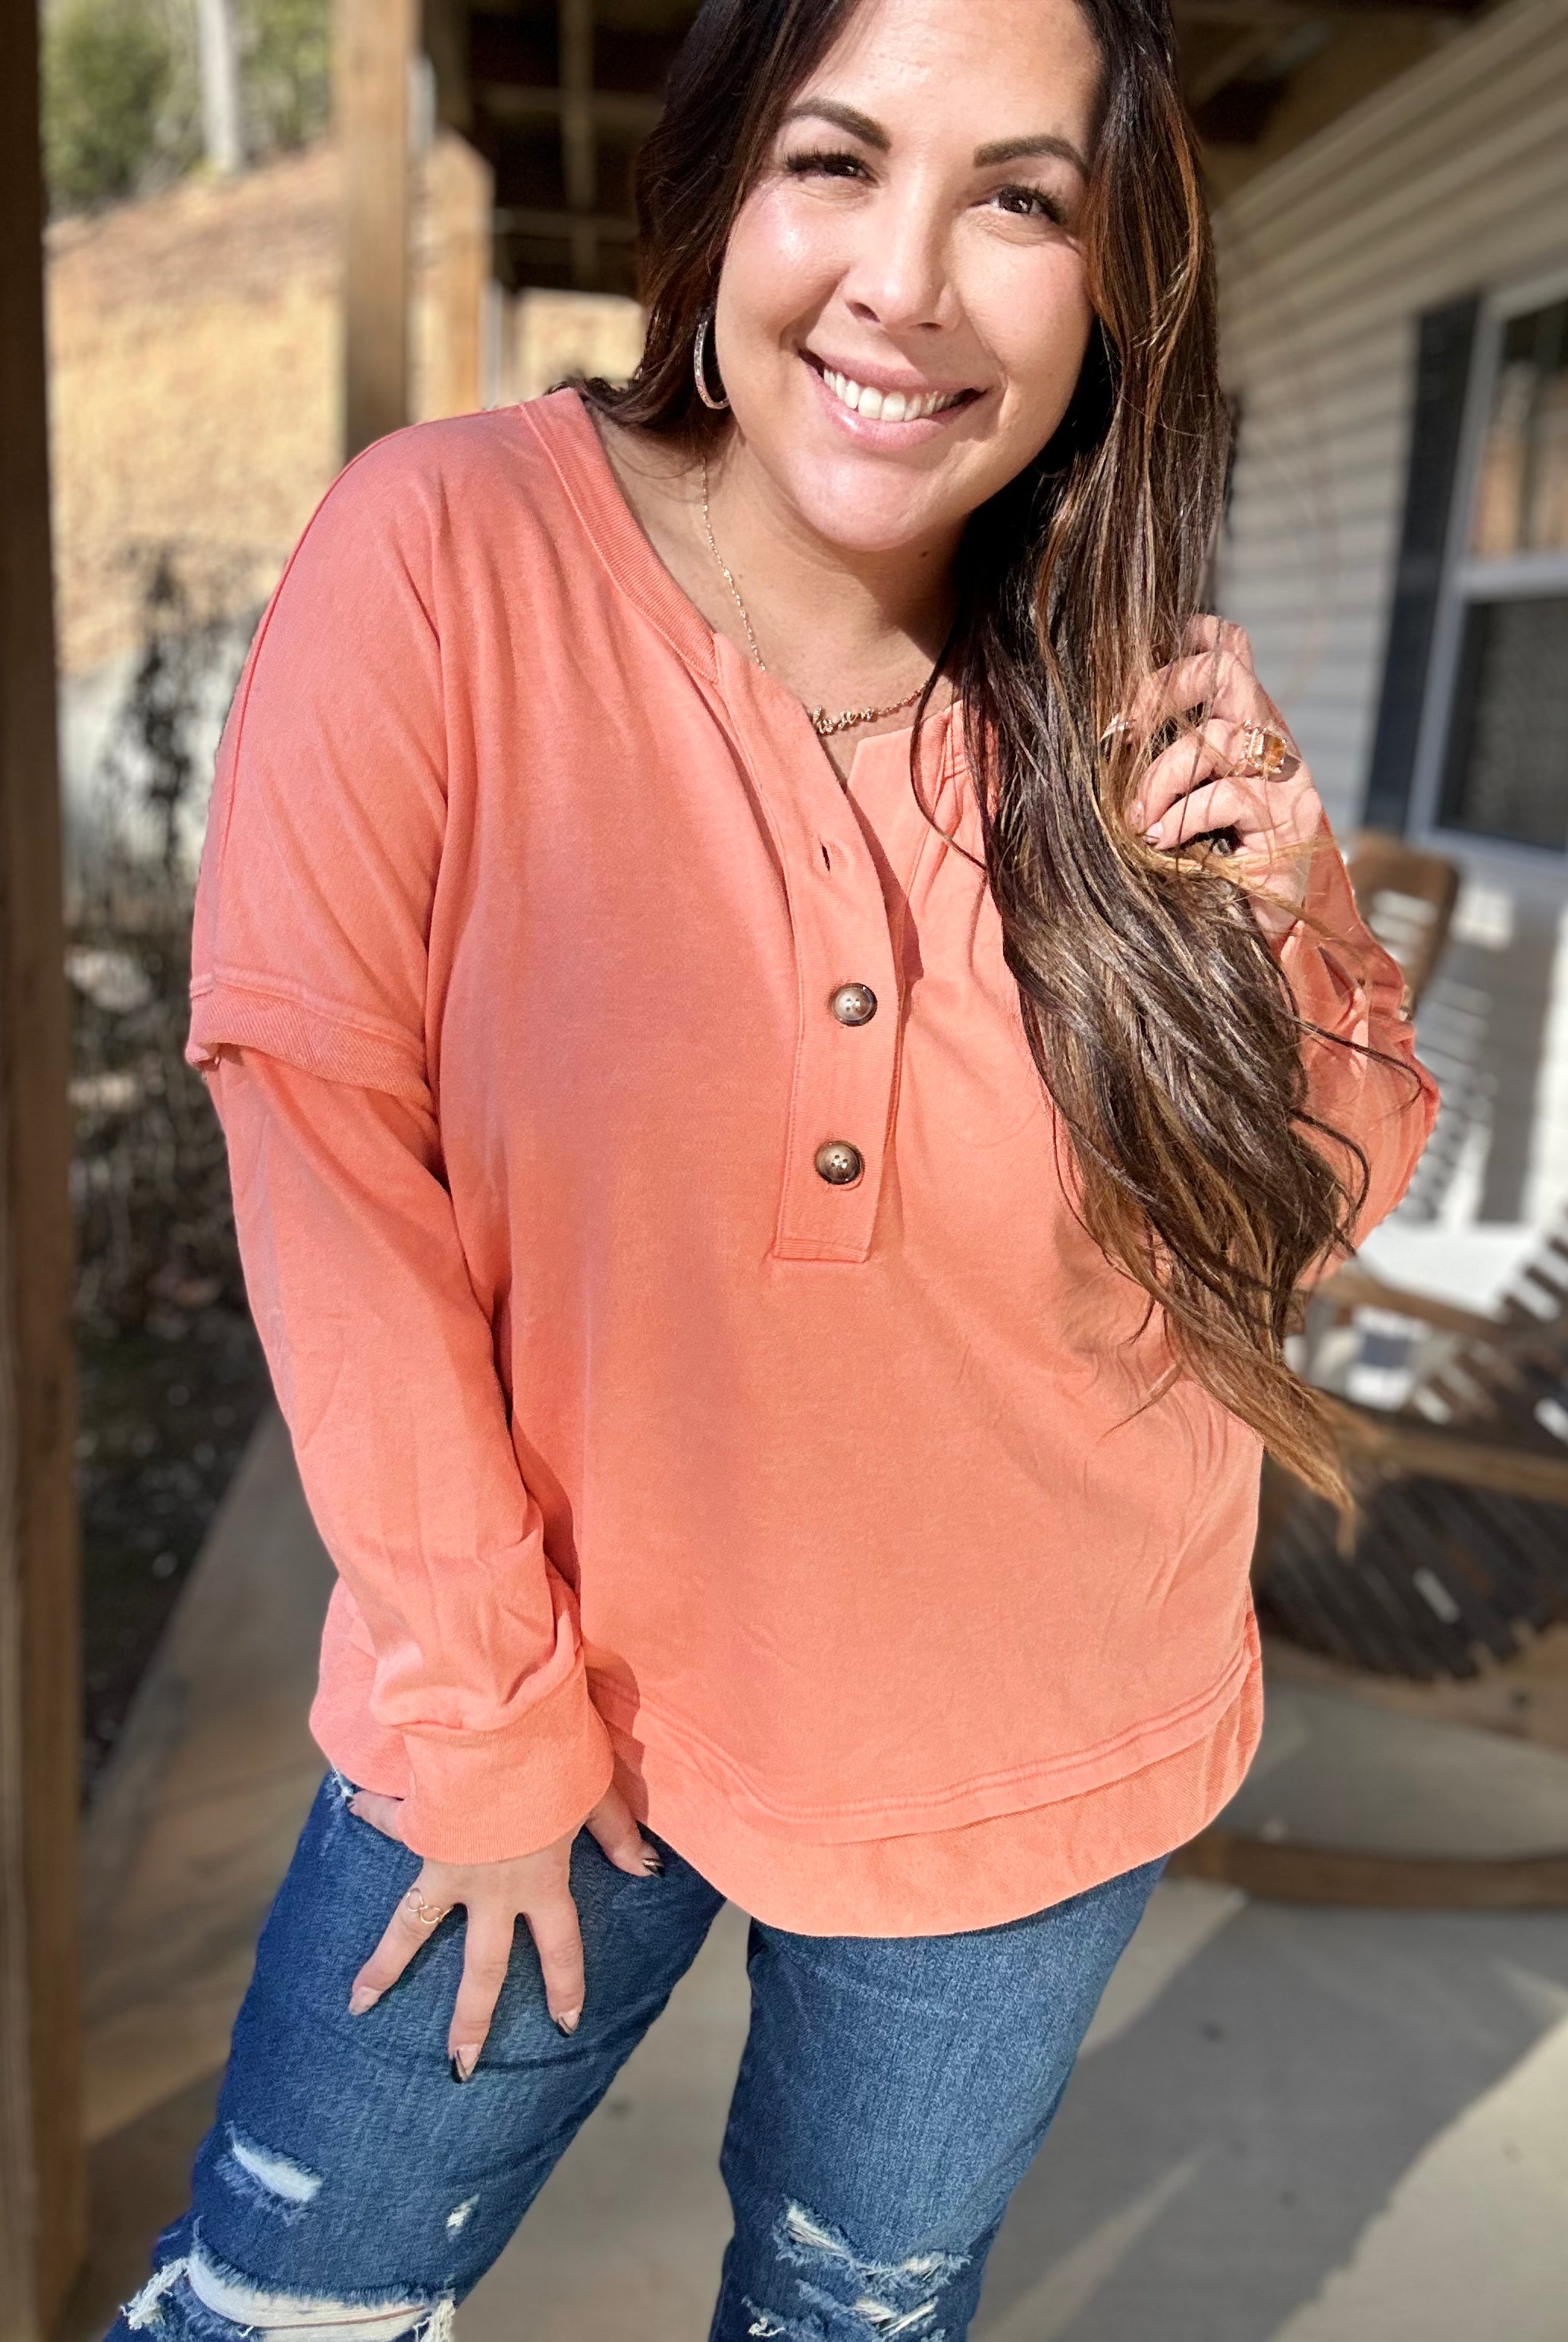 Live For It Long Sleeve Top (multiple colors)-120 Long Sleeve Tops-White Birch-Heathered Boho Boutique, Women's Fashion and Accessories in Palmetto, FL